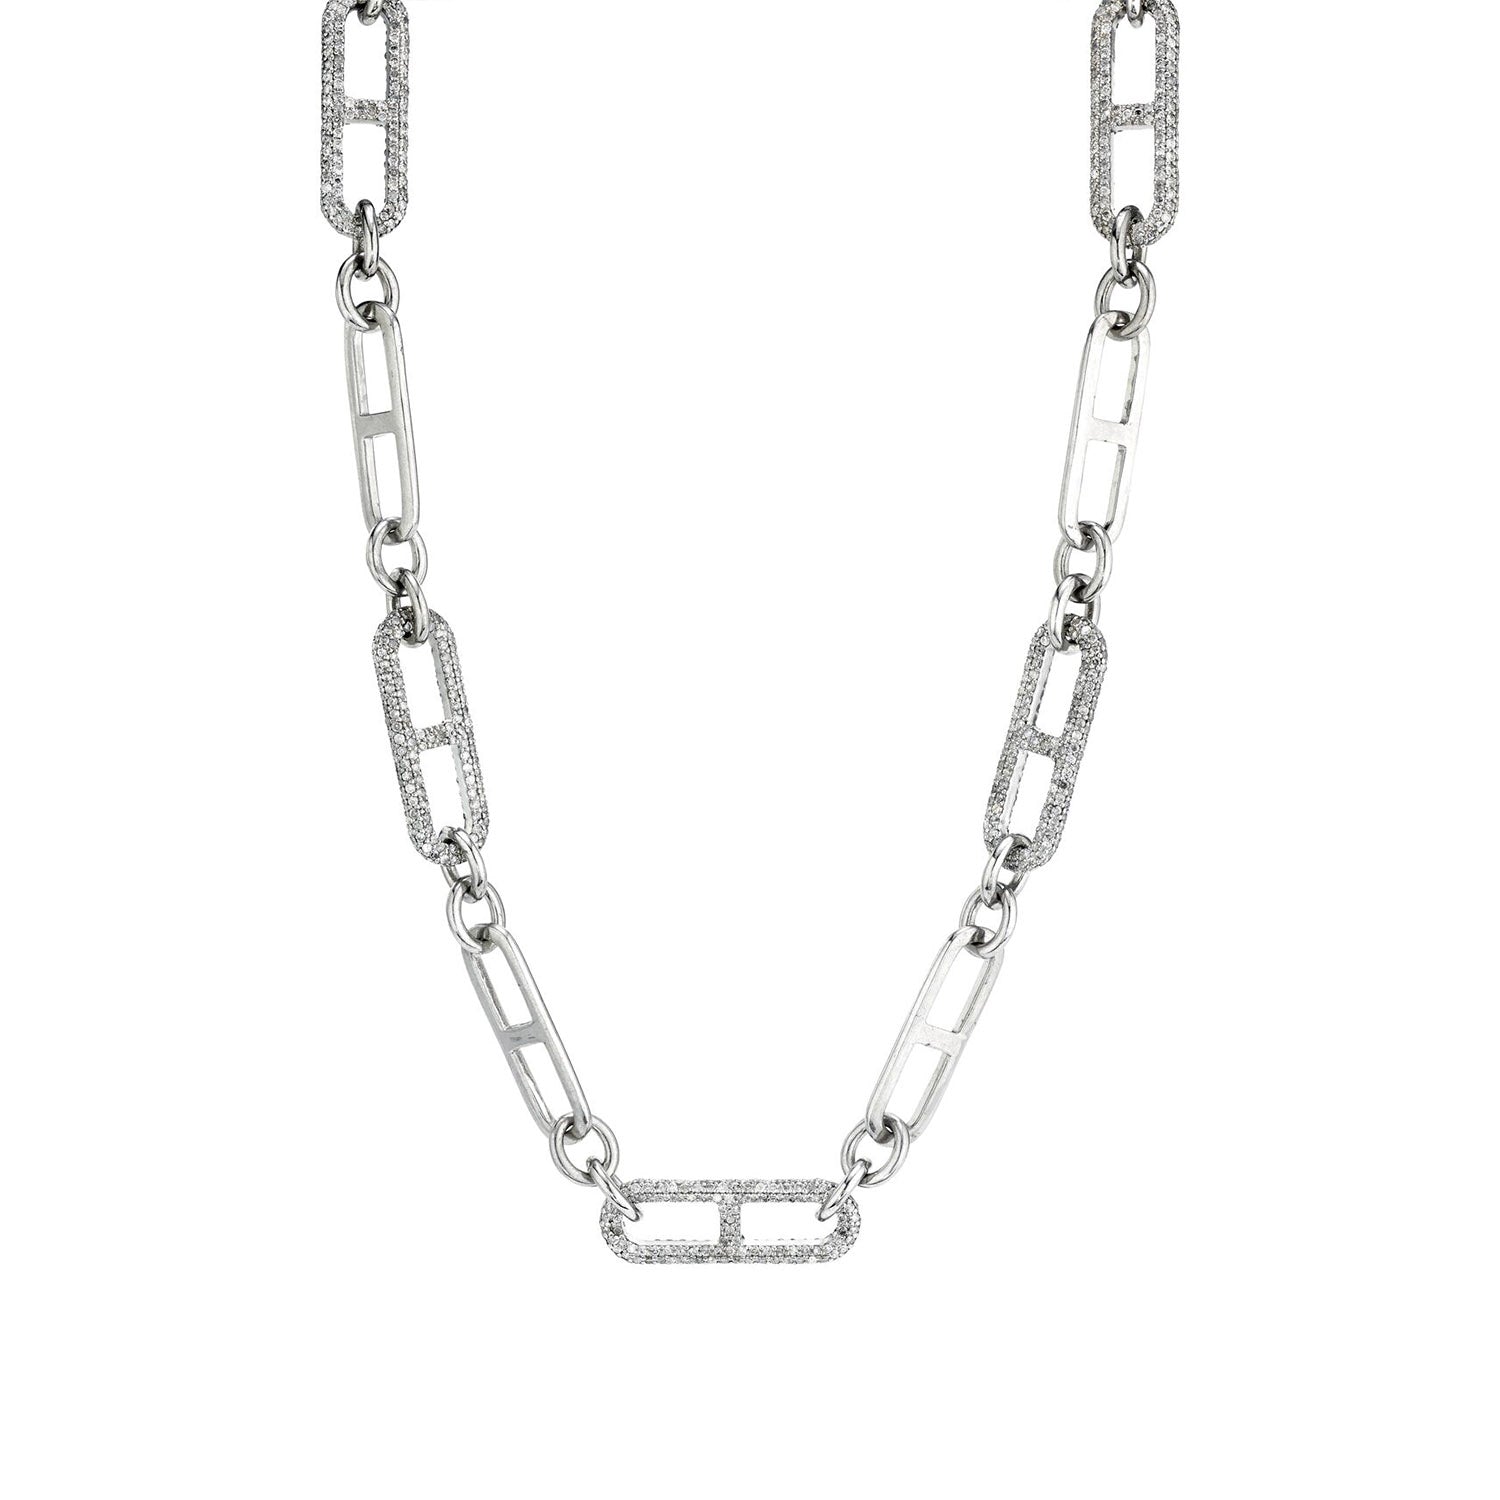 Paris Link Chain Necklace with 5 Pave Diamond Links - 19"  N0000990 - TBird